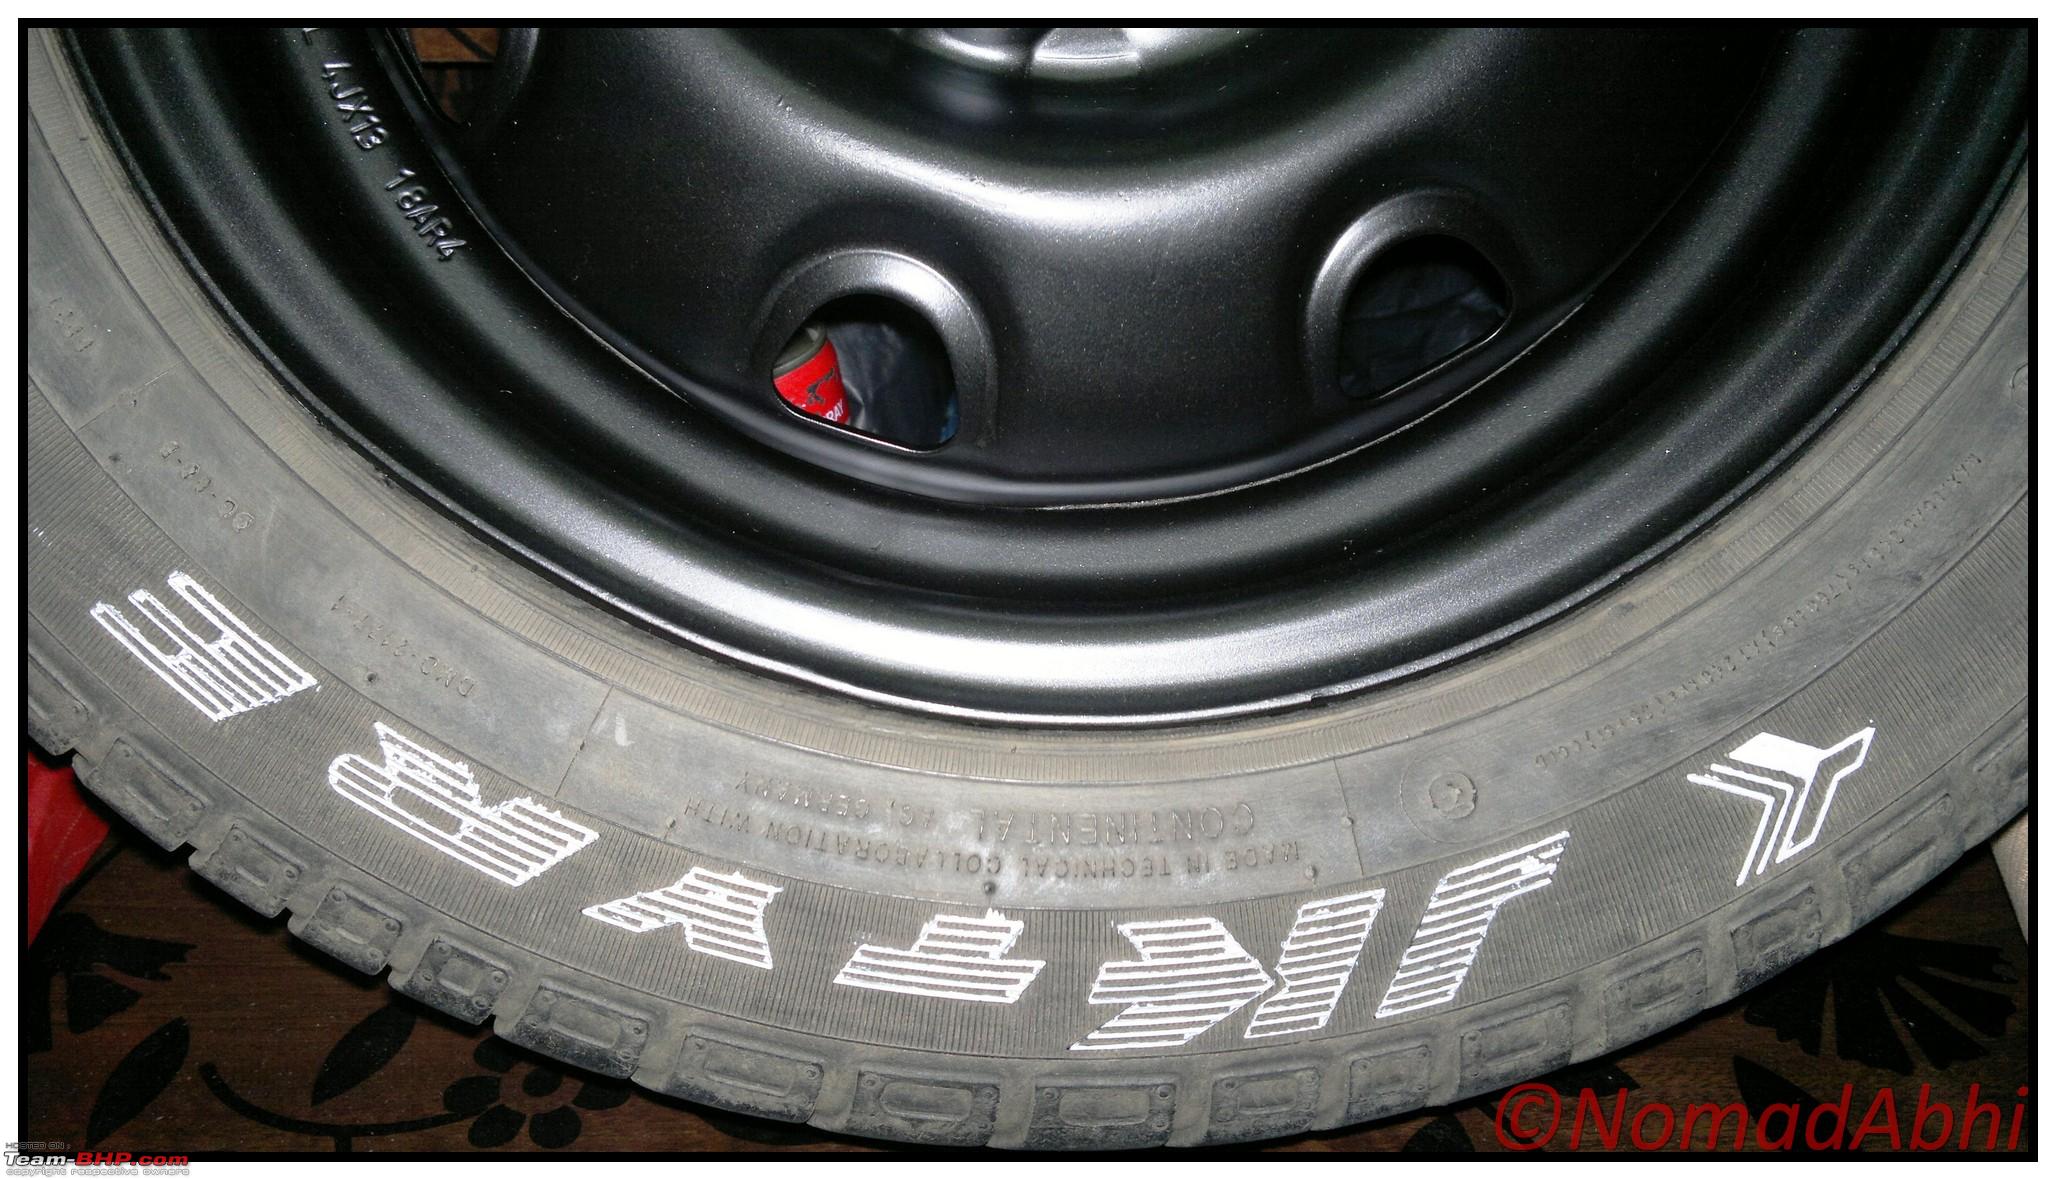 How to paint the Tyre Sidewall Letters? - Team-BHP